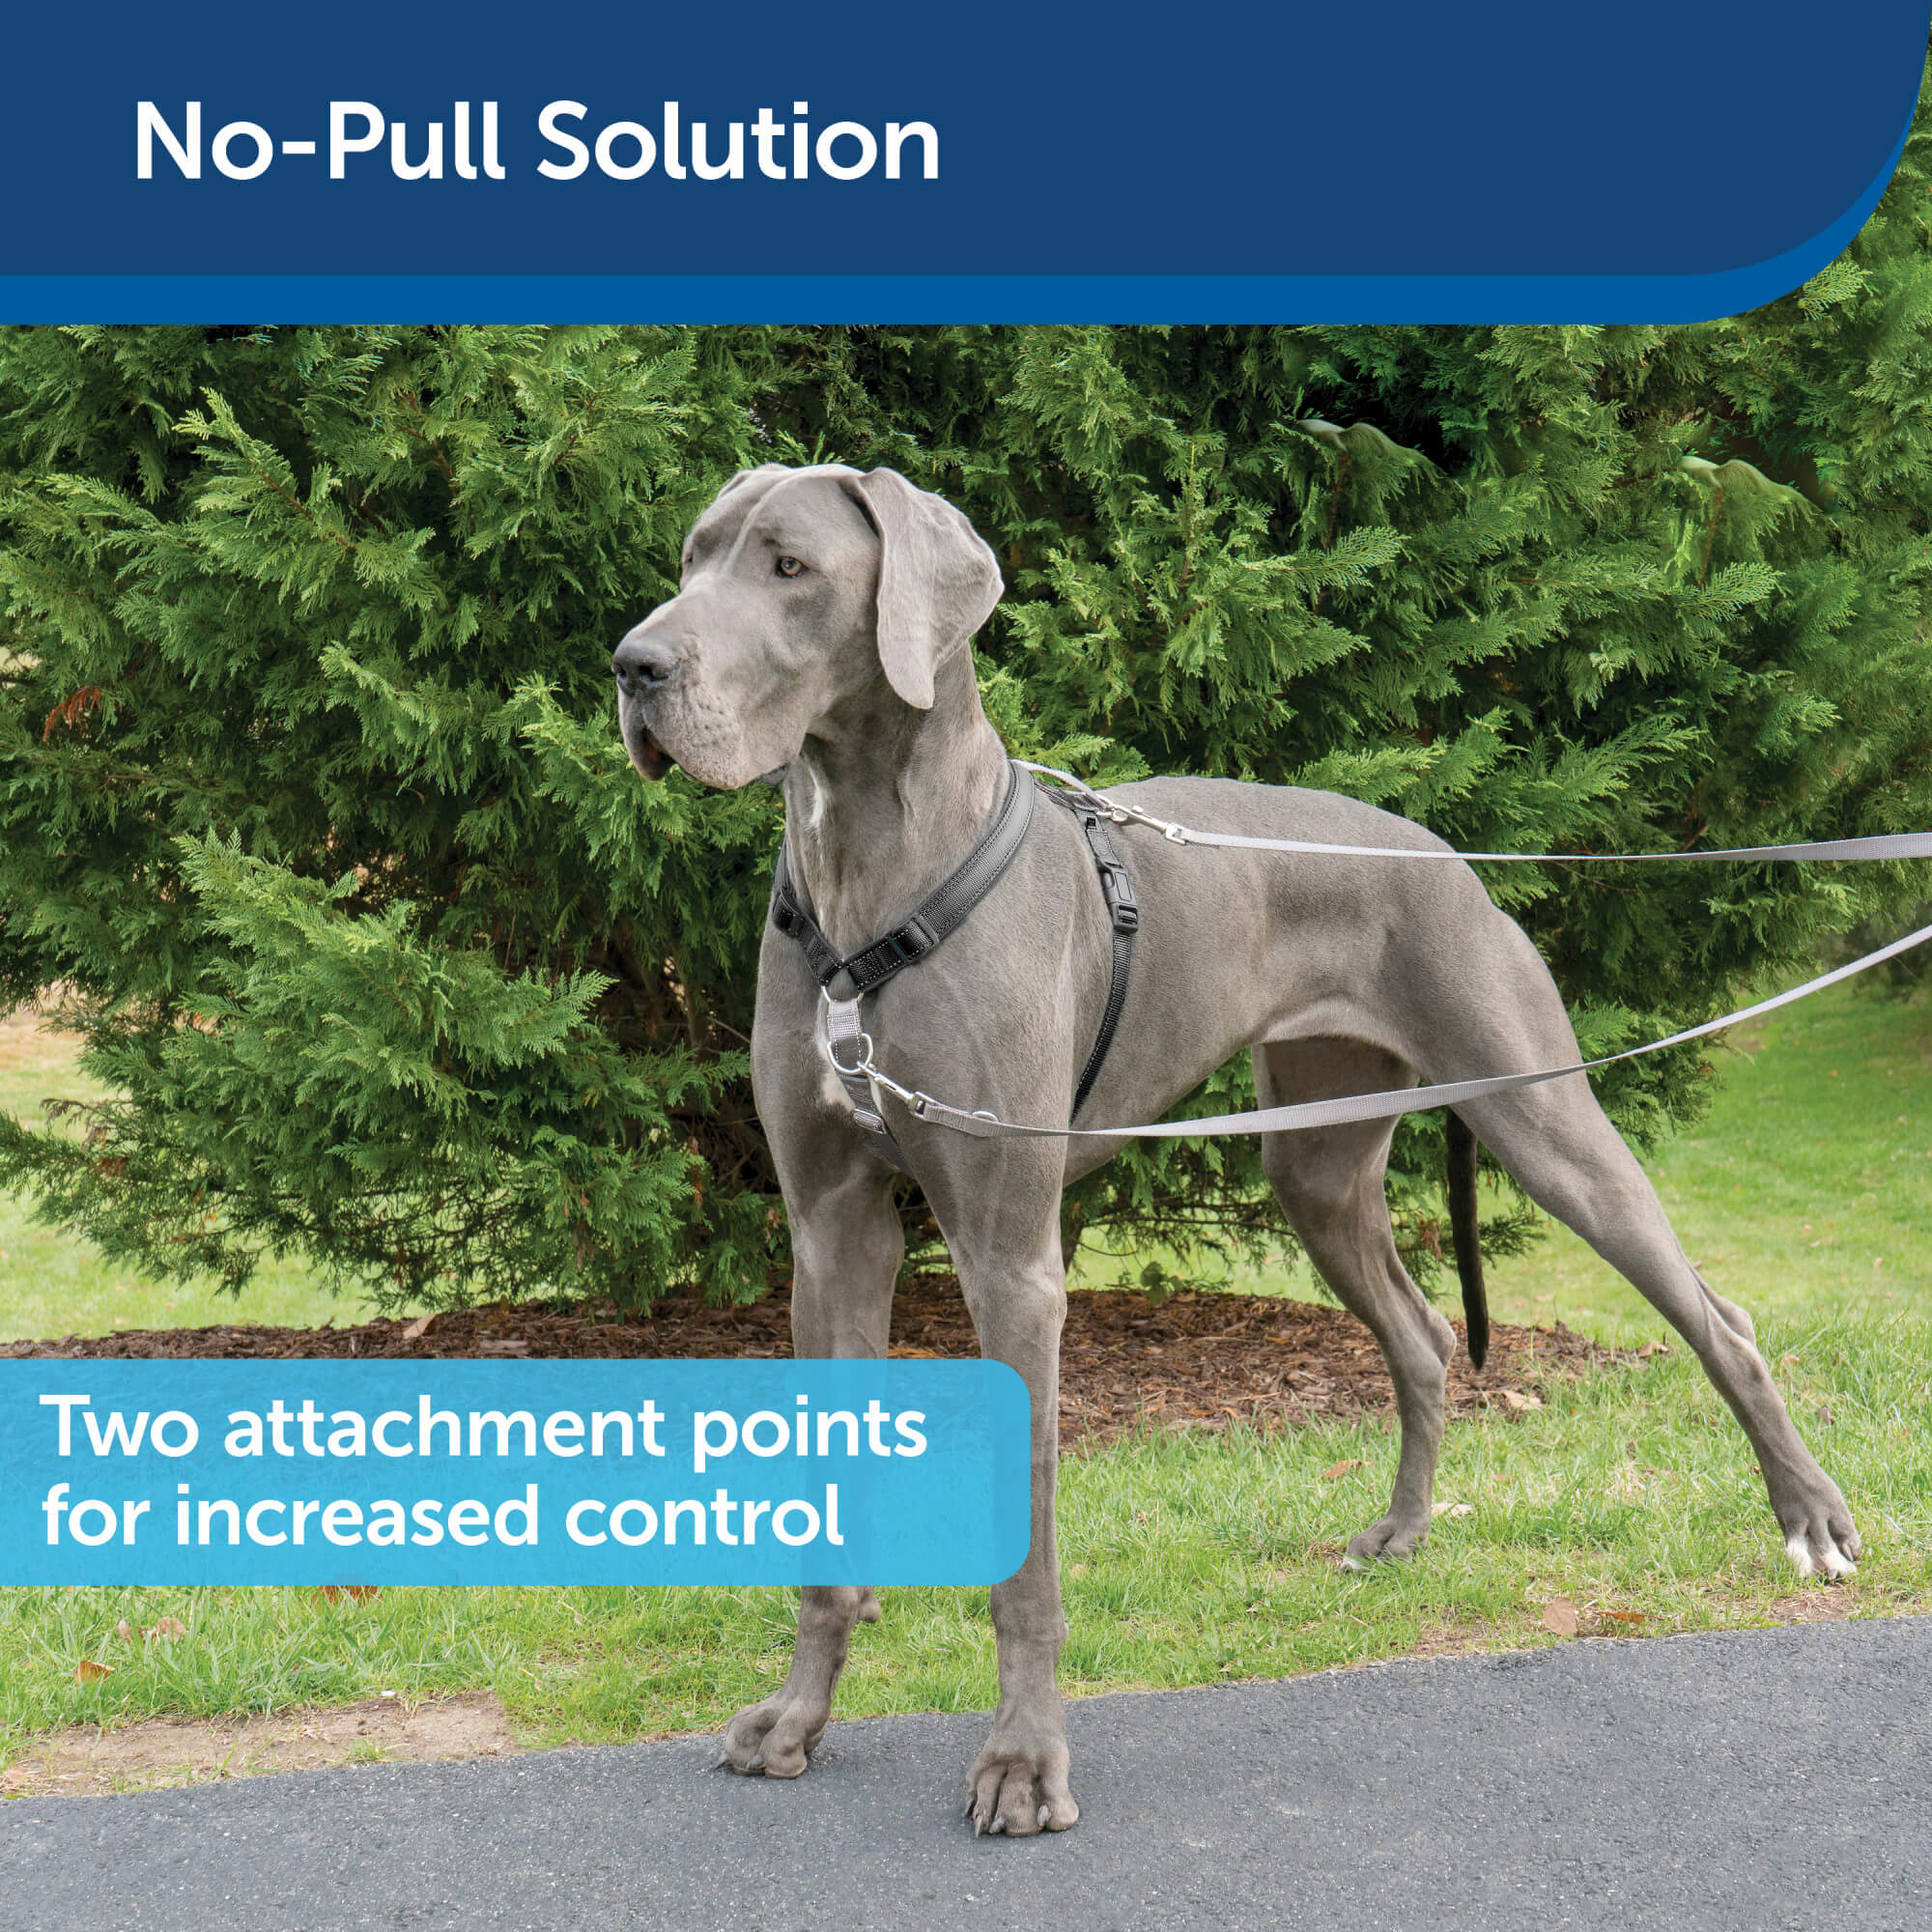 PetSafe Harness Two attachment points for increased control